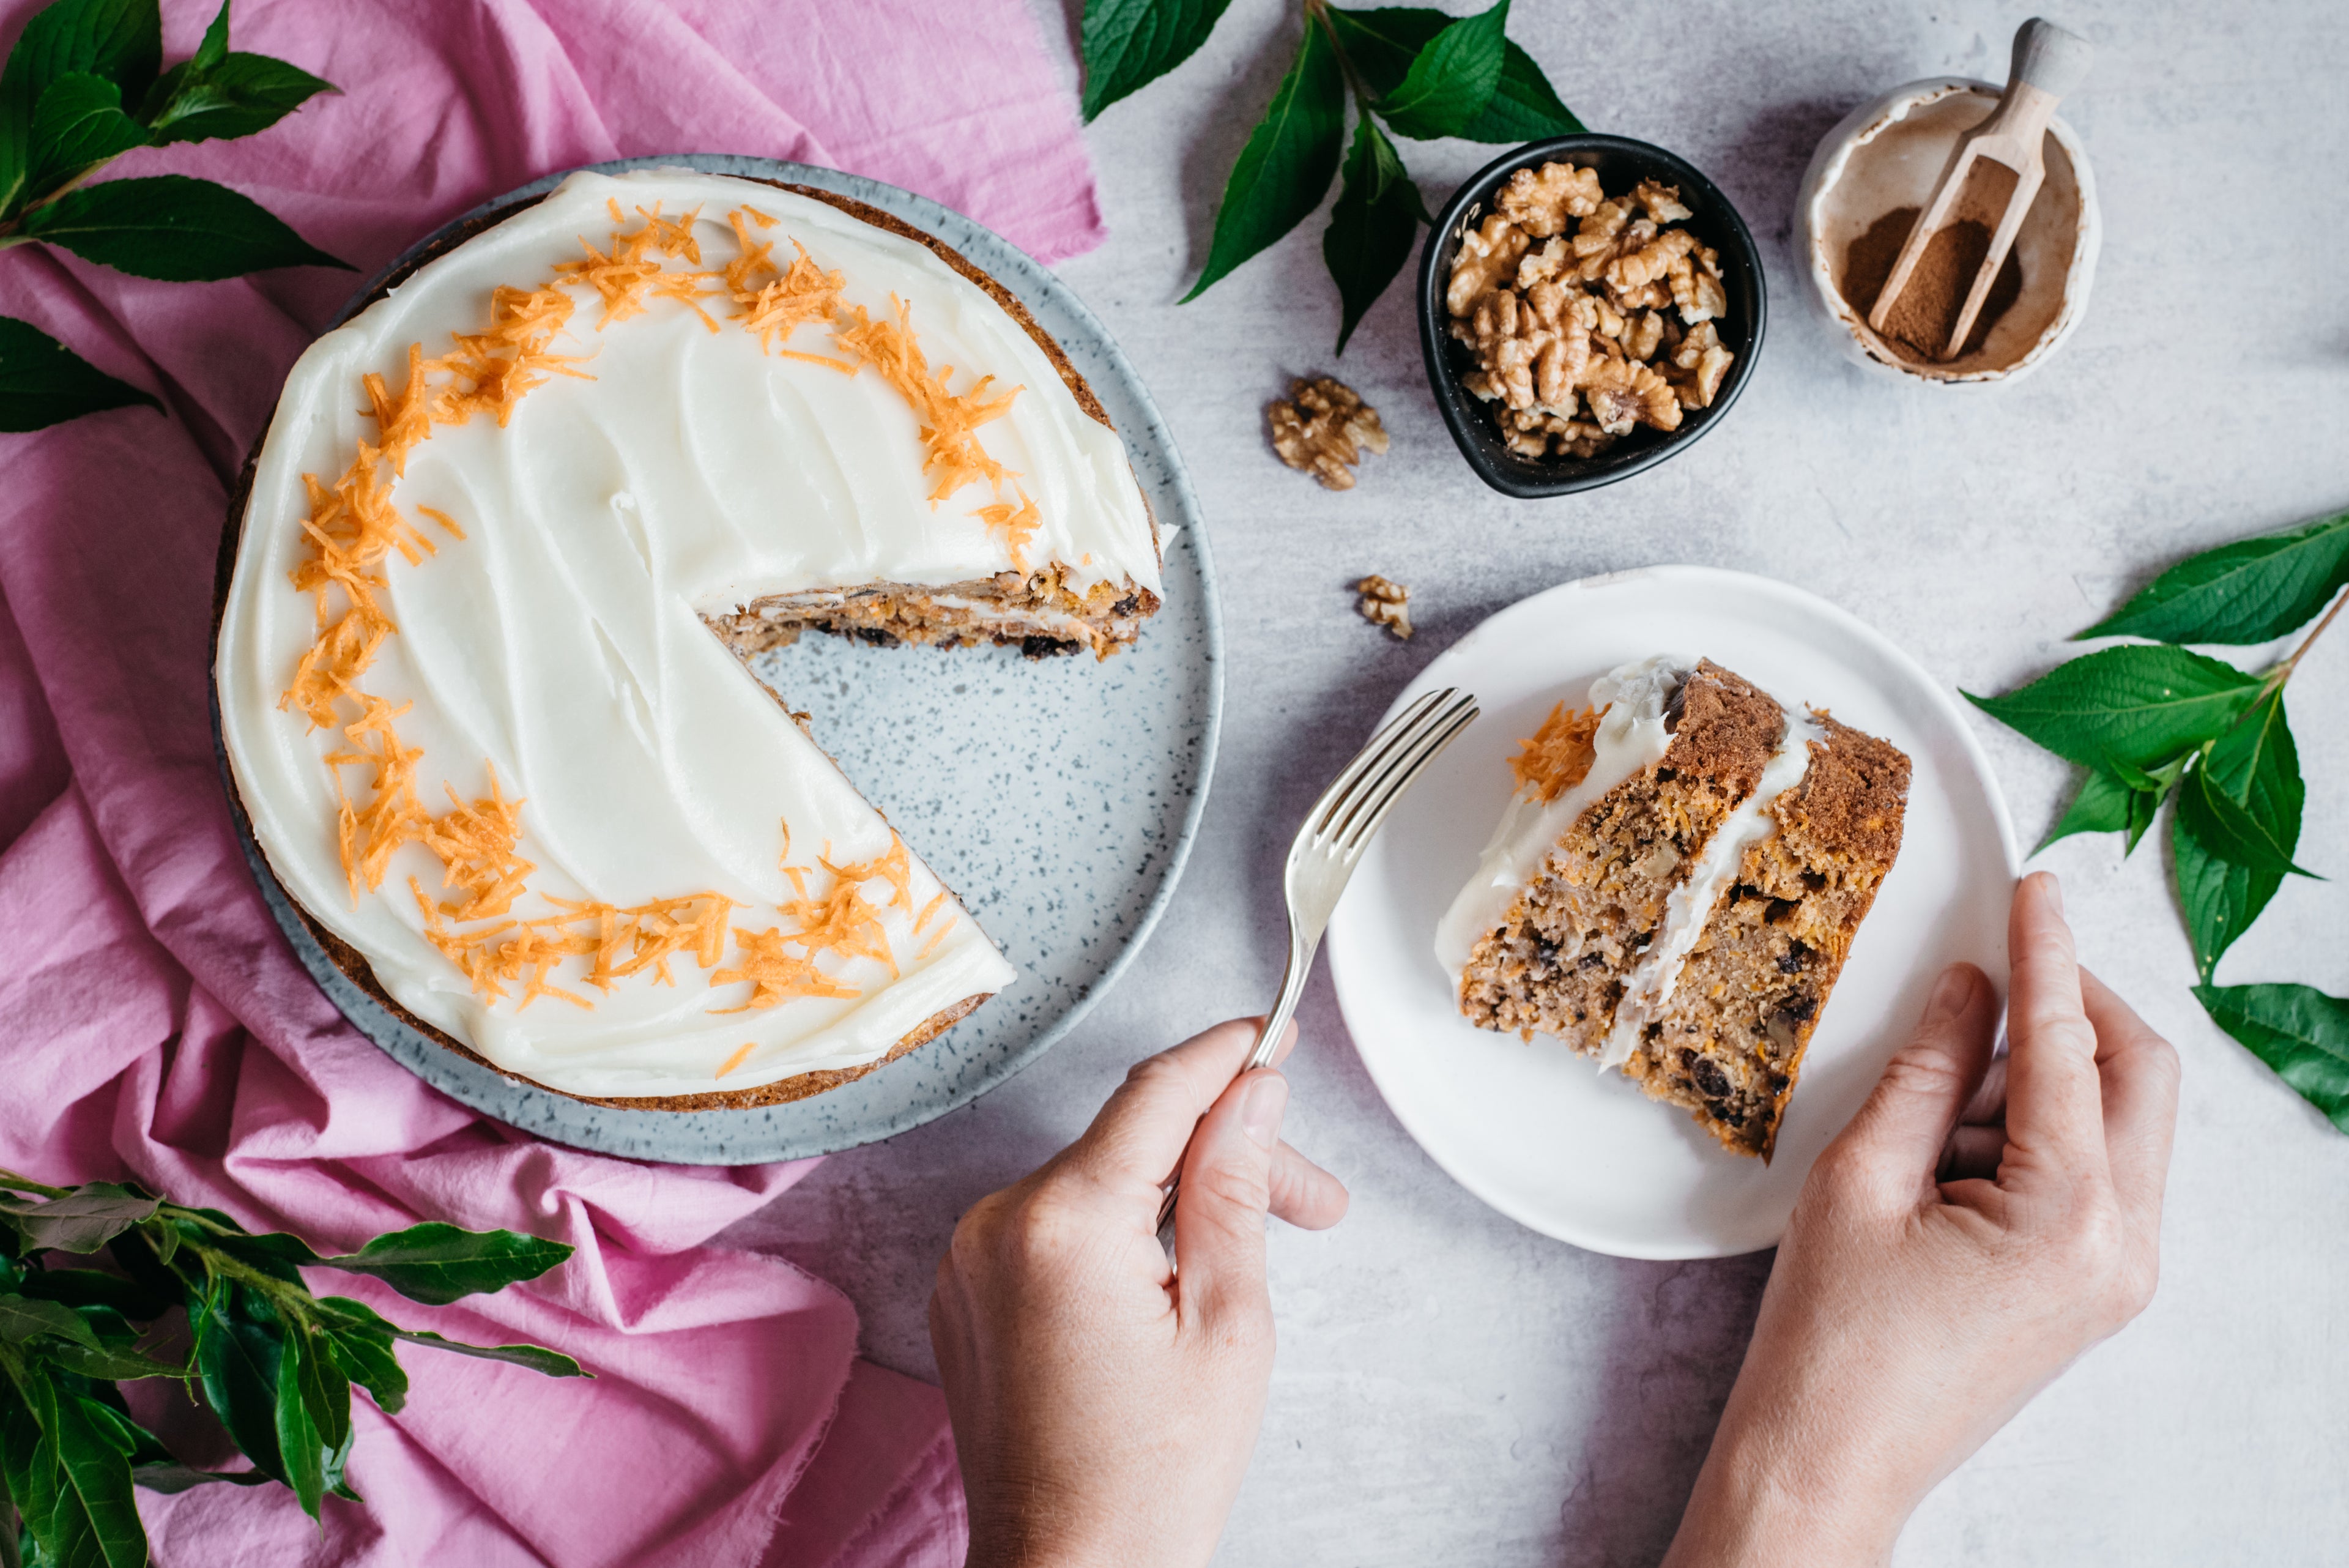 Top down view of a low sugar carrot cake with a slice cut out on plate